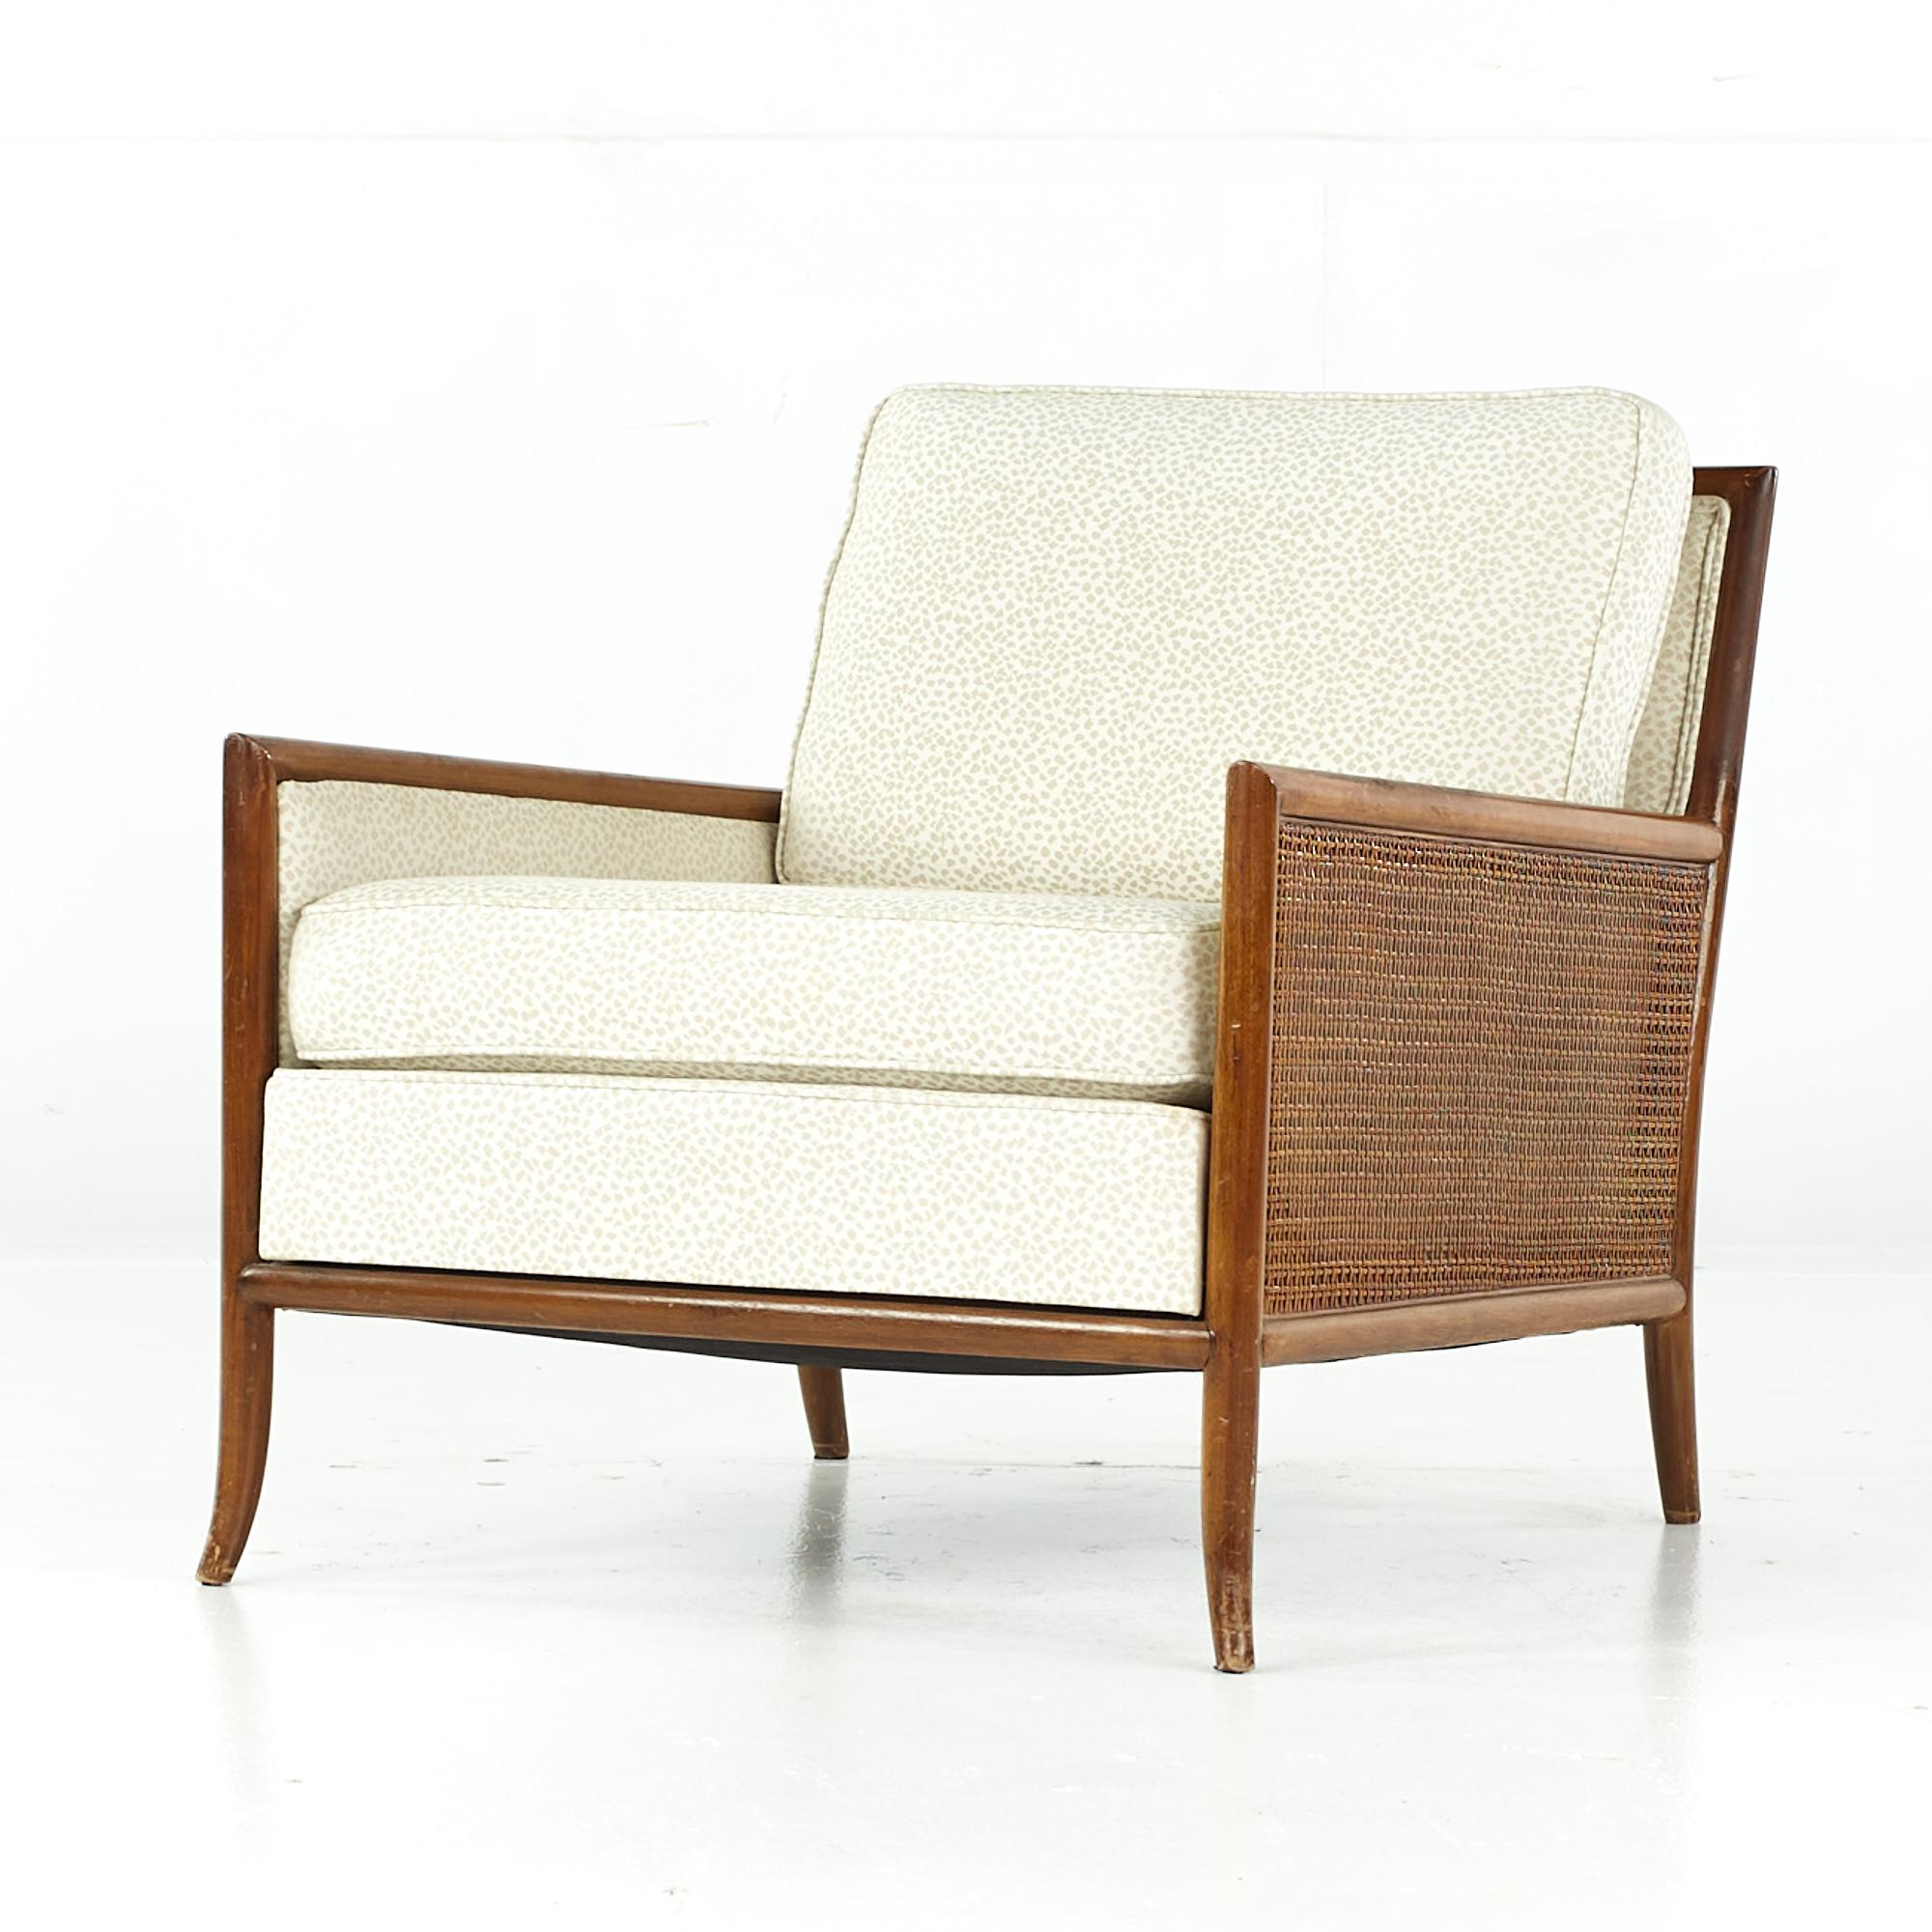 Late 20th Century T.H. Robsjohn Gibbings Mid Century Cane Sided Lounge Chairs - Pair For Sale